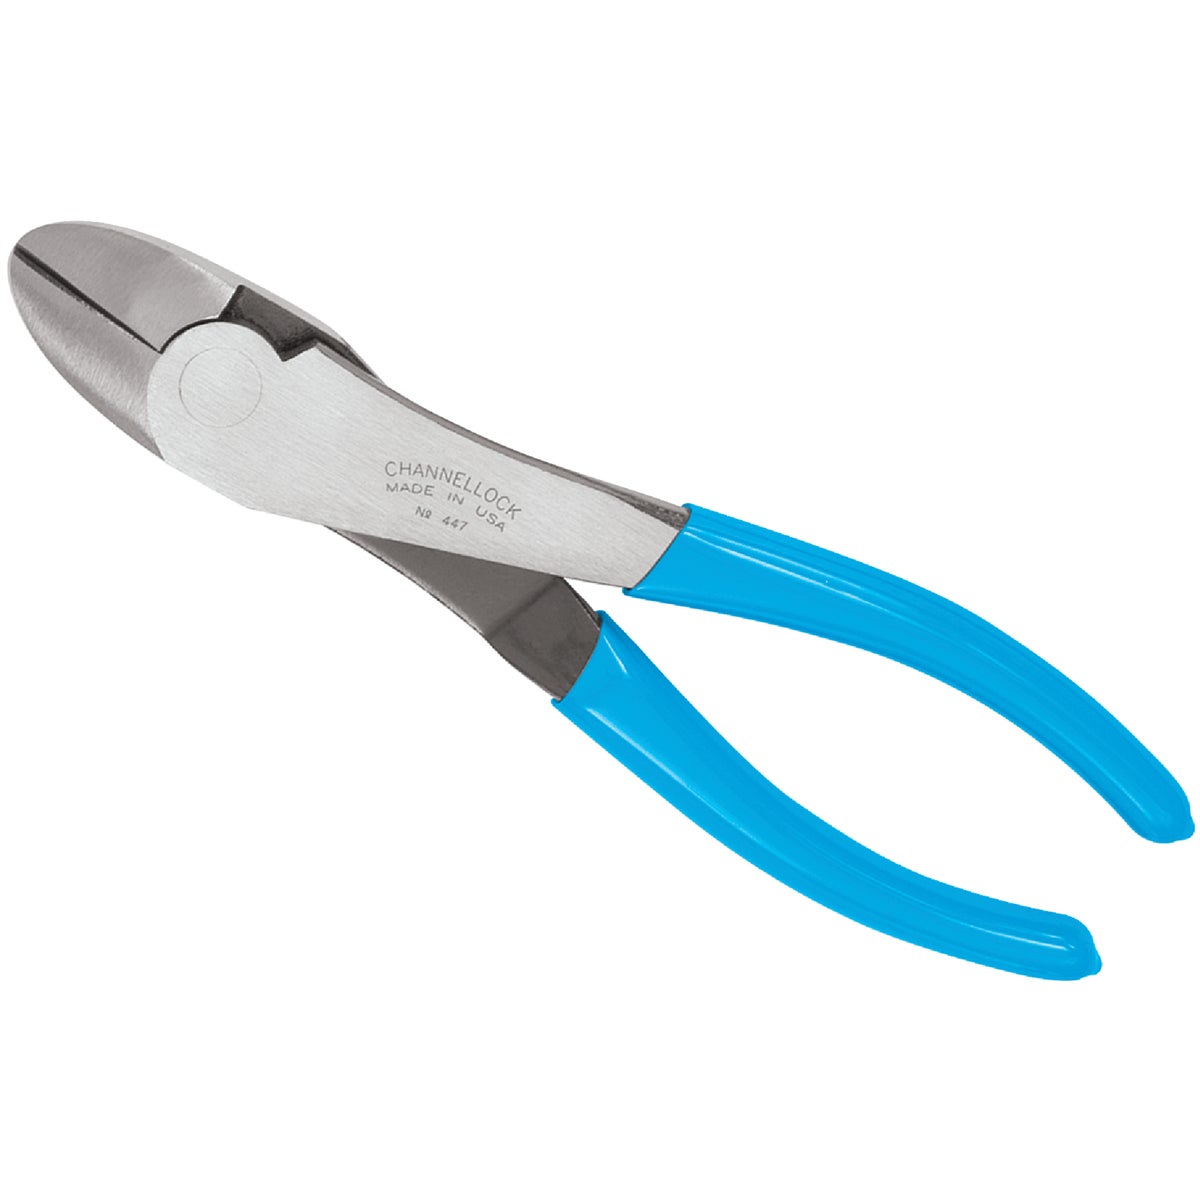 Channellock 7-3/4 In. Curved Diagonal Cutting Pliers with Box Joint